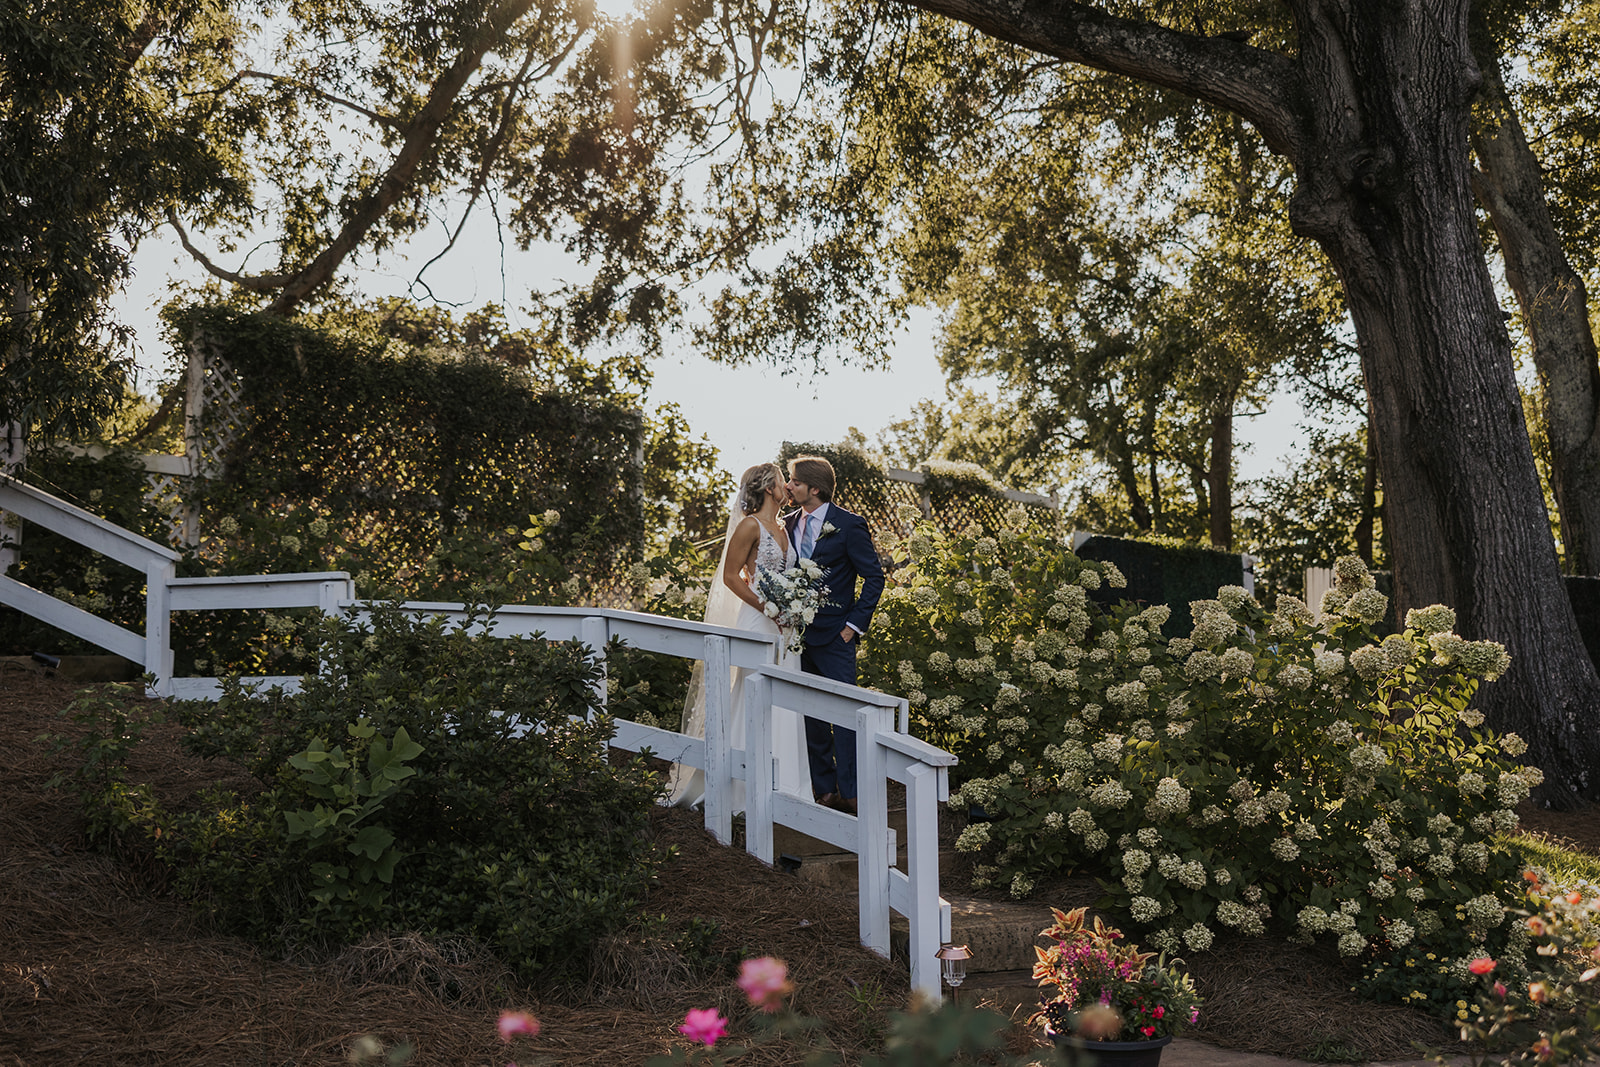 Bride and groom share an intimate moment outside of their stunning Georgia wedding venue